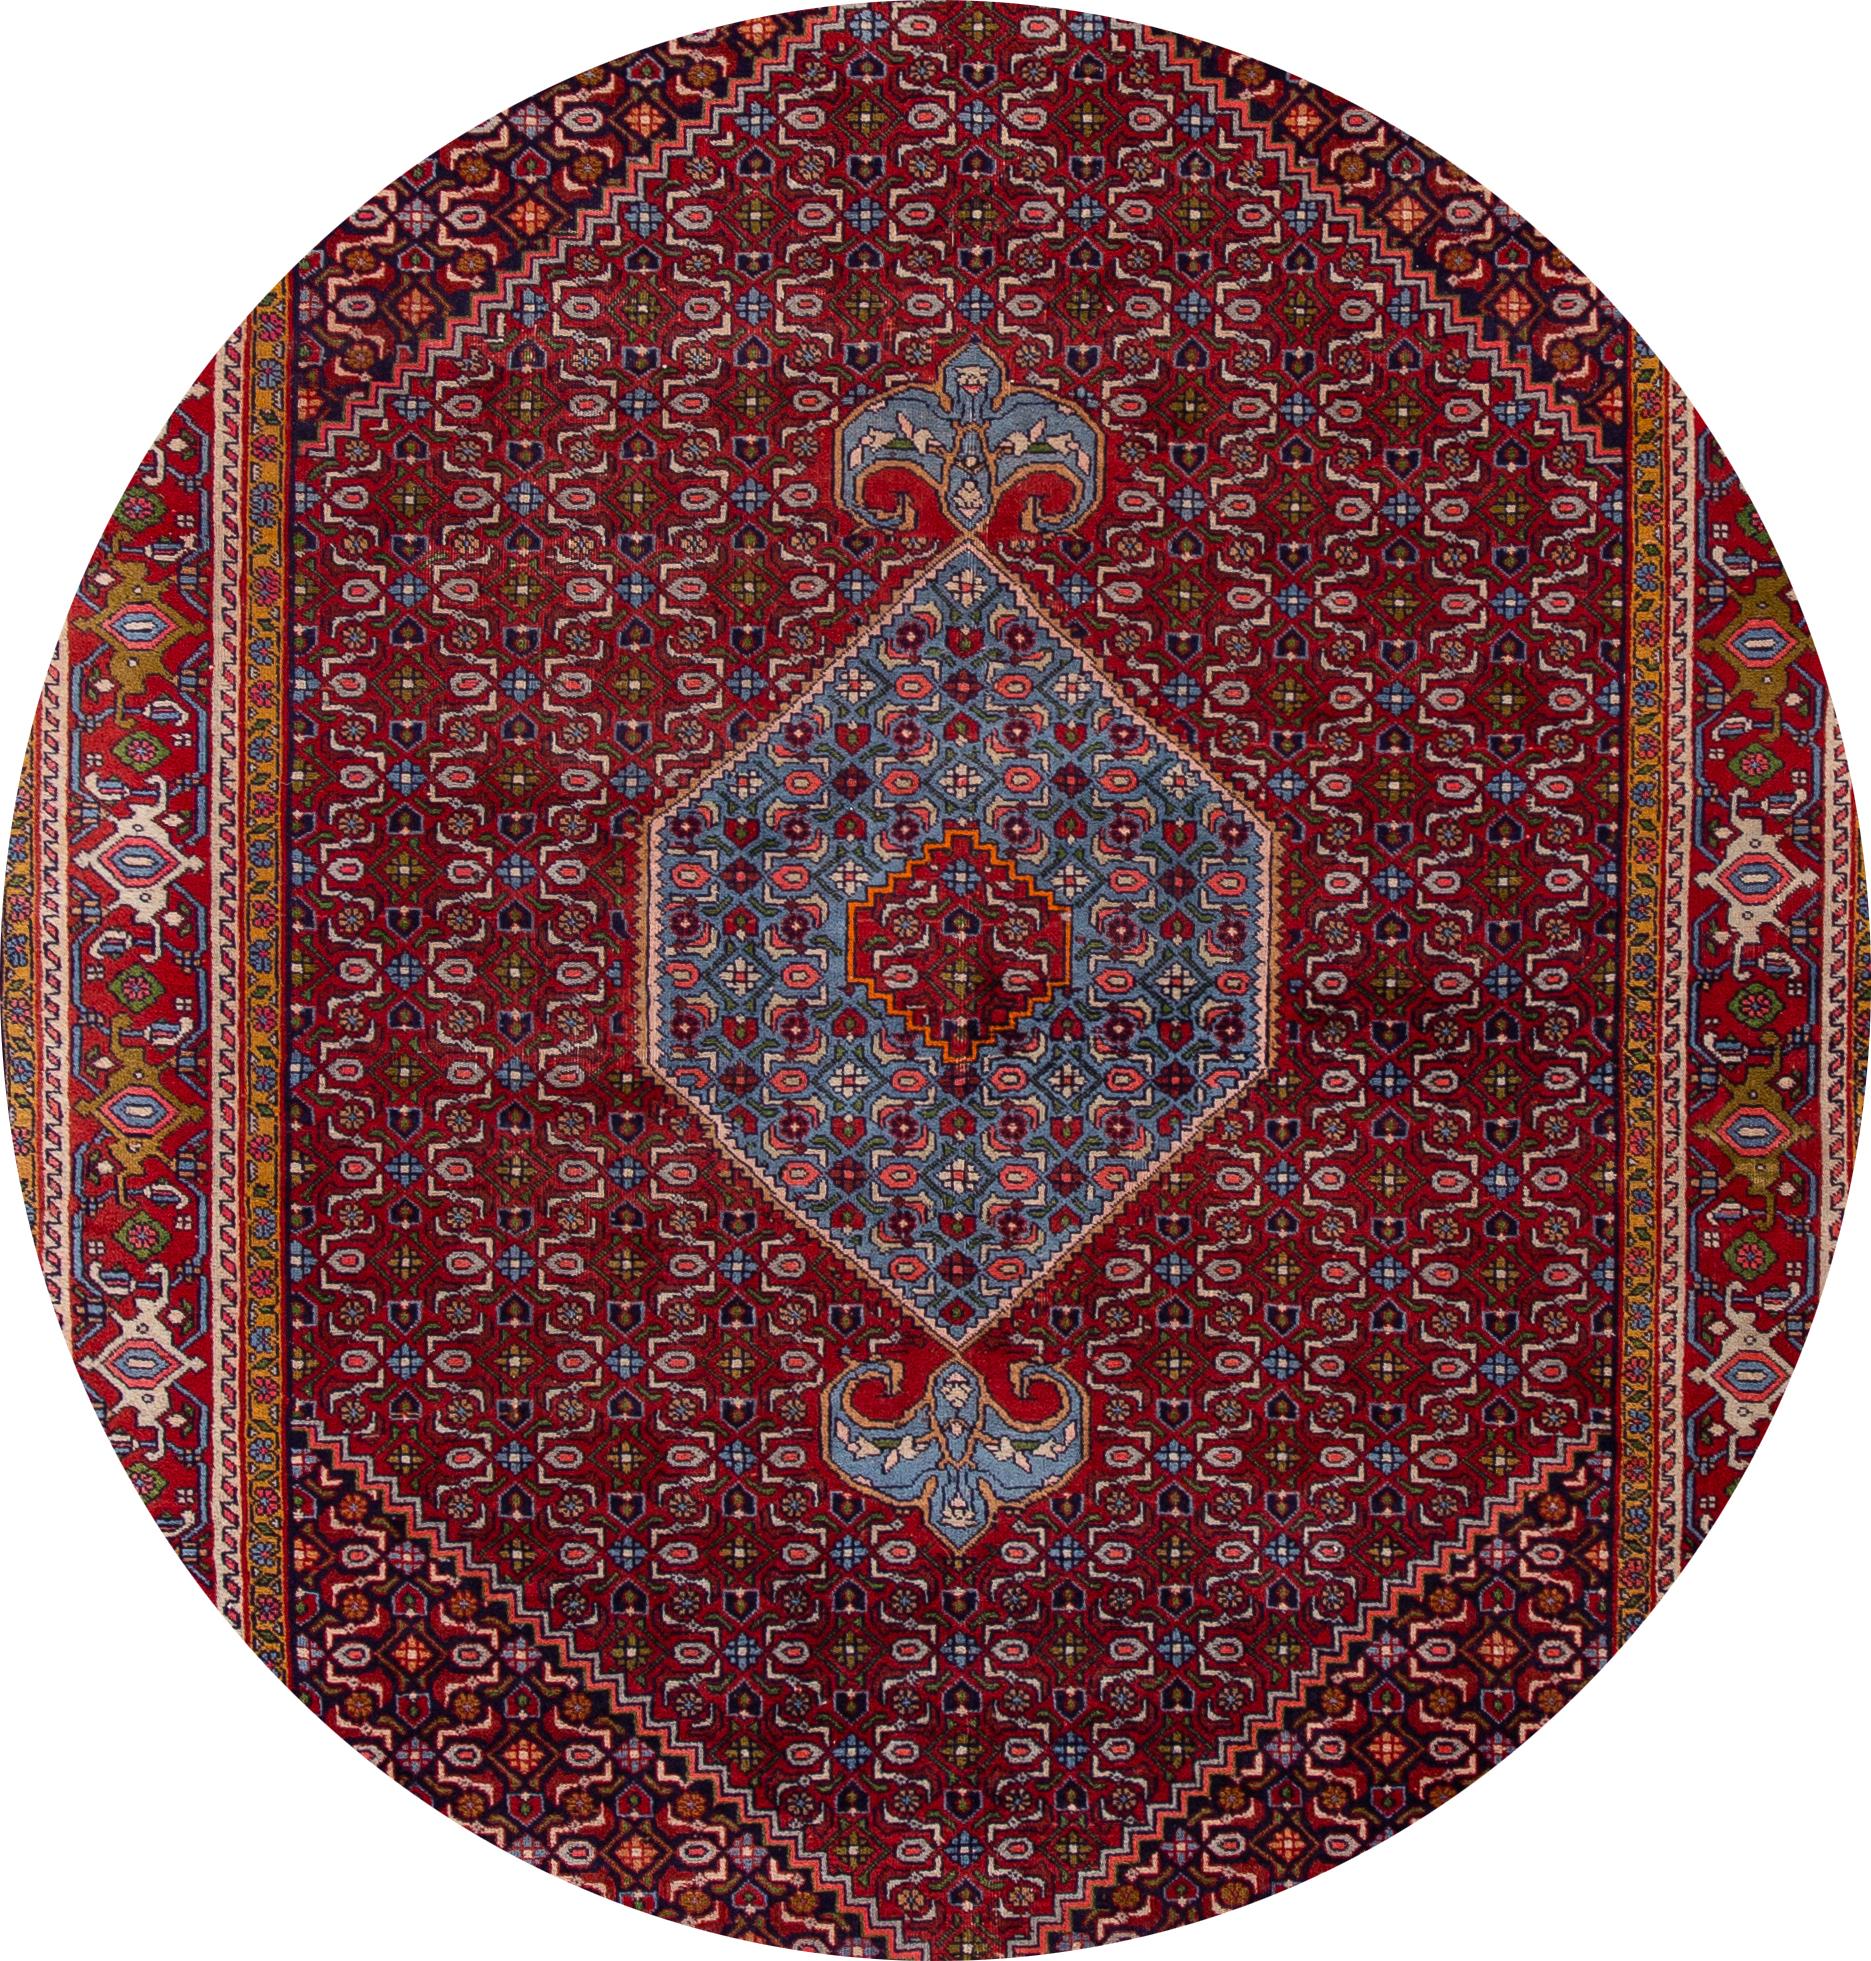 Beautiful antique Bidjar rug, hand knotted wool with a red field, blue and ivory accents in center medallion design,
circa 1930.
This rug measures 6' 7